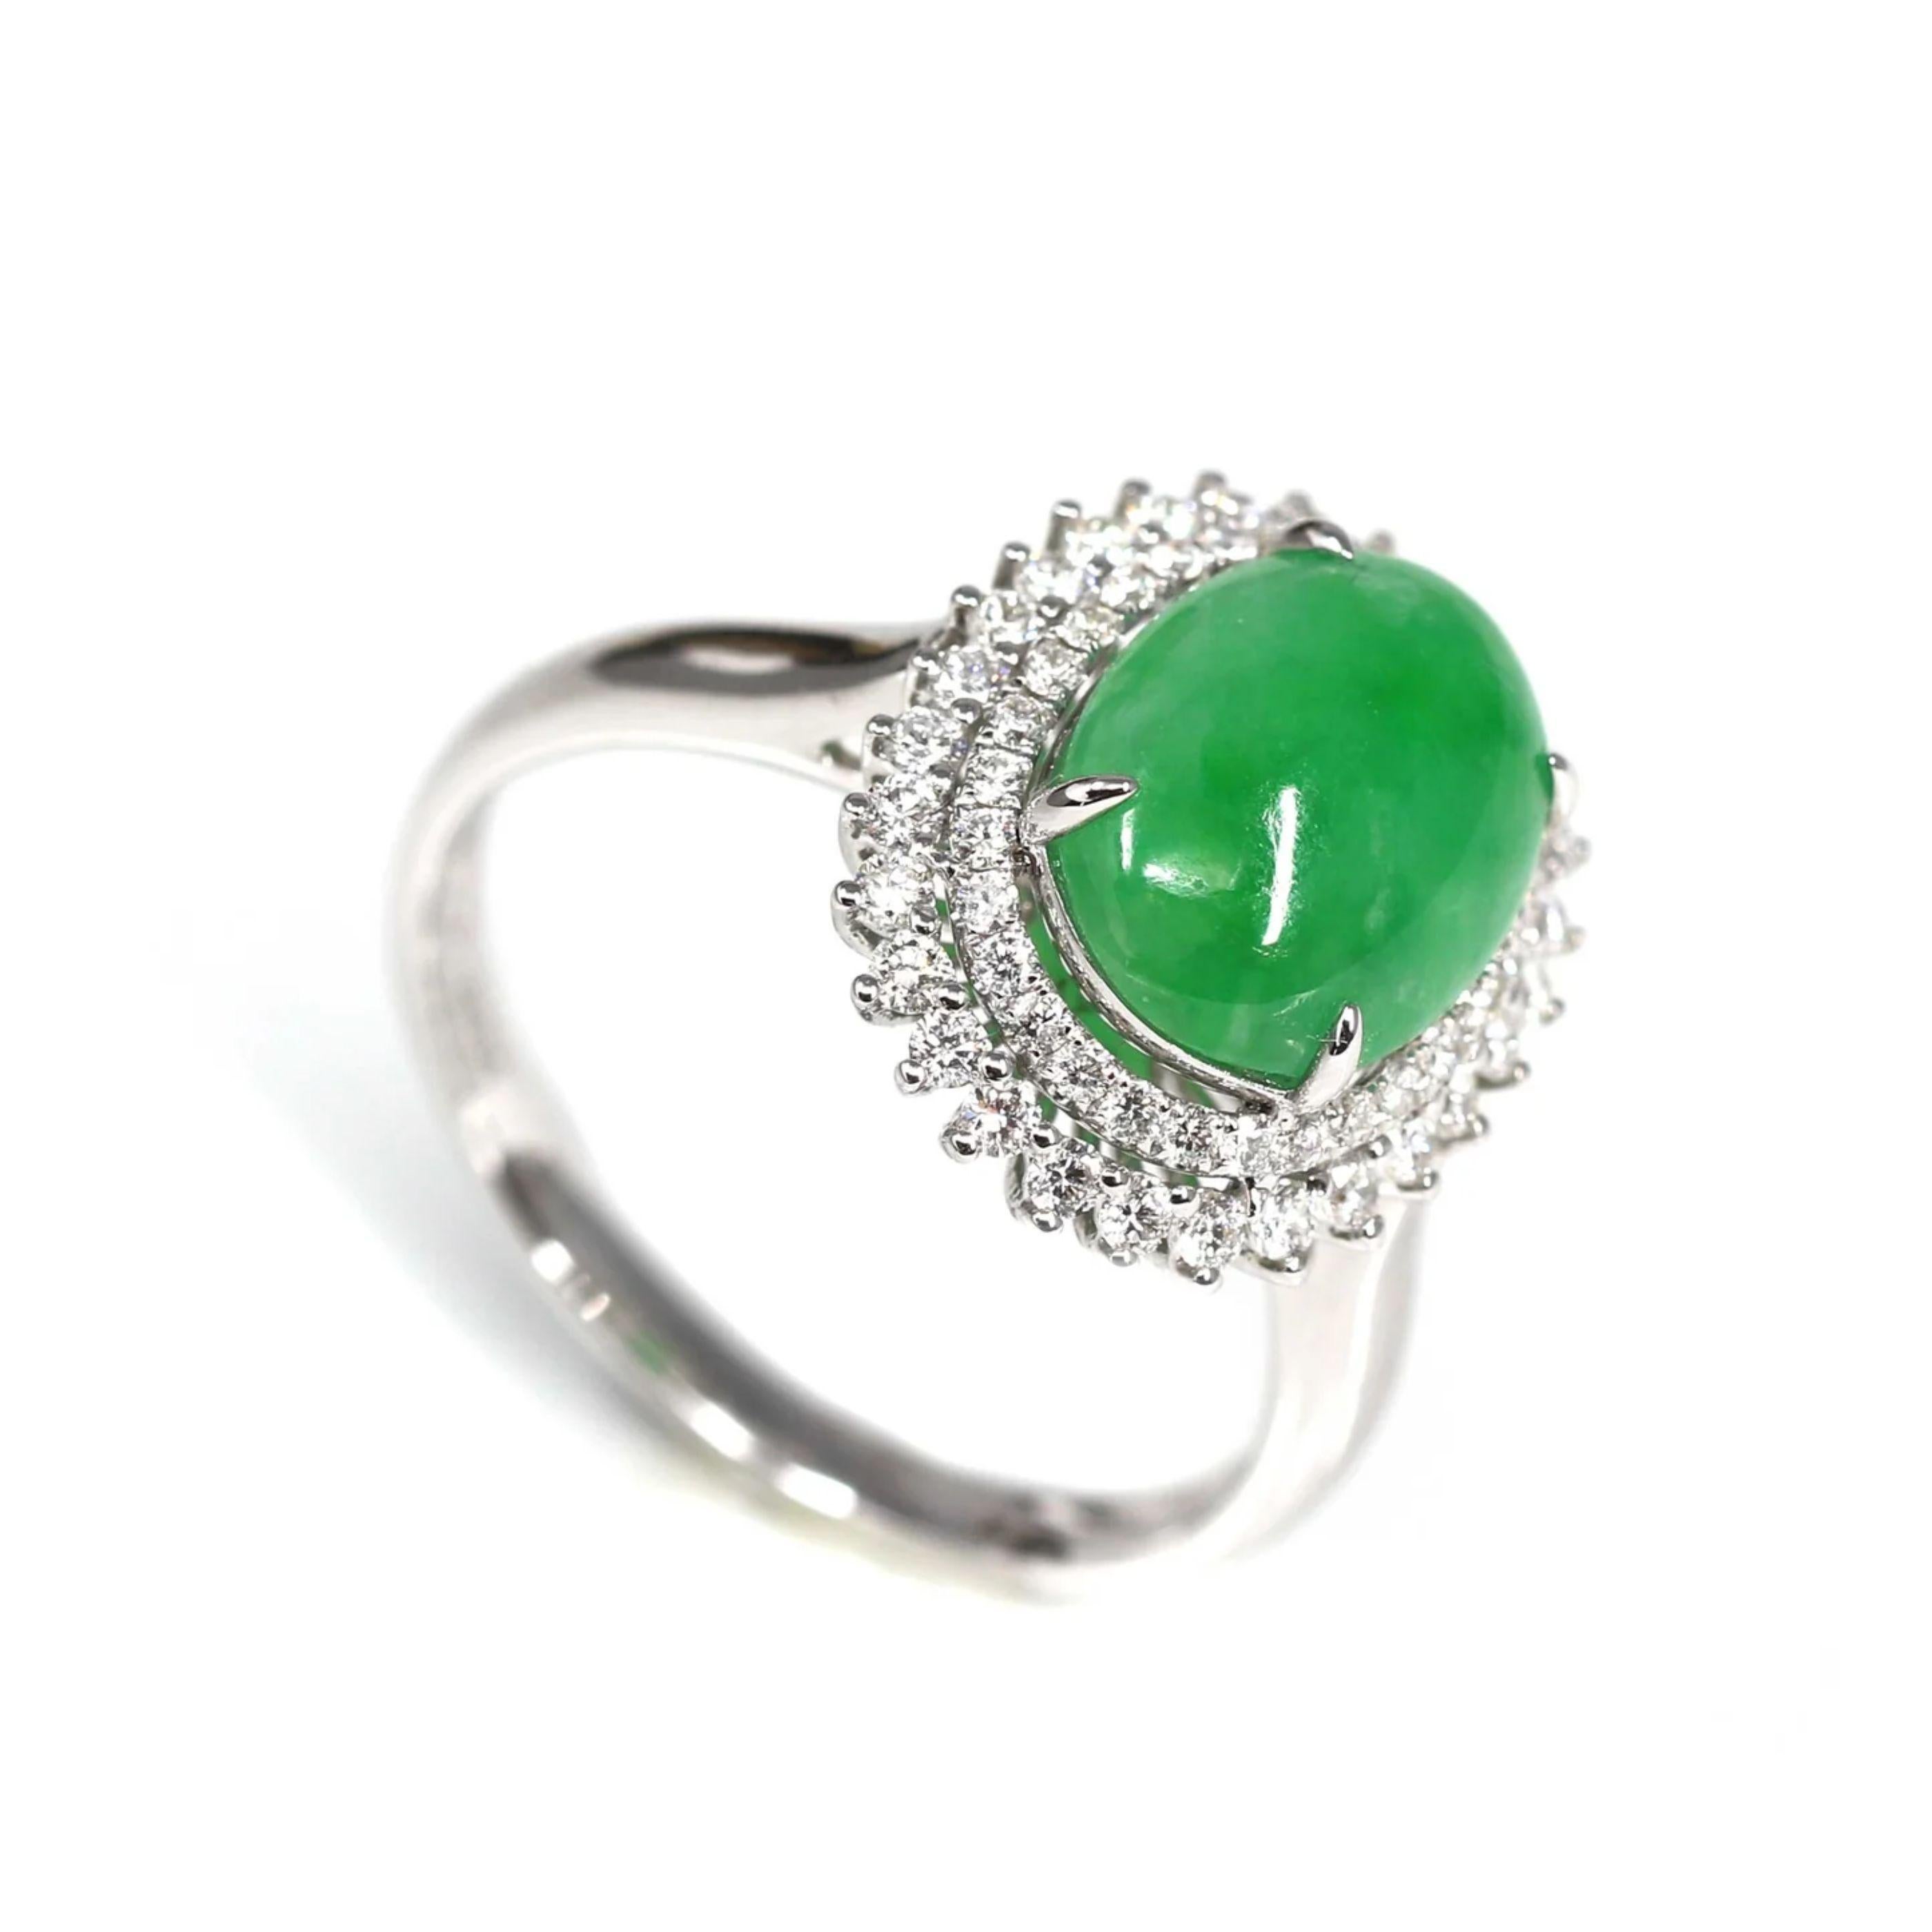 * ORIGINAL DESIGN --- Inspired by the natural beauty of genuine Burmese Imperial Green Jadeite, the rich, beautiful apple green color is found on no other stone. This one of a kind engagement ring combines the natural beauty of the extremely rare